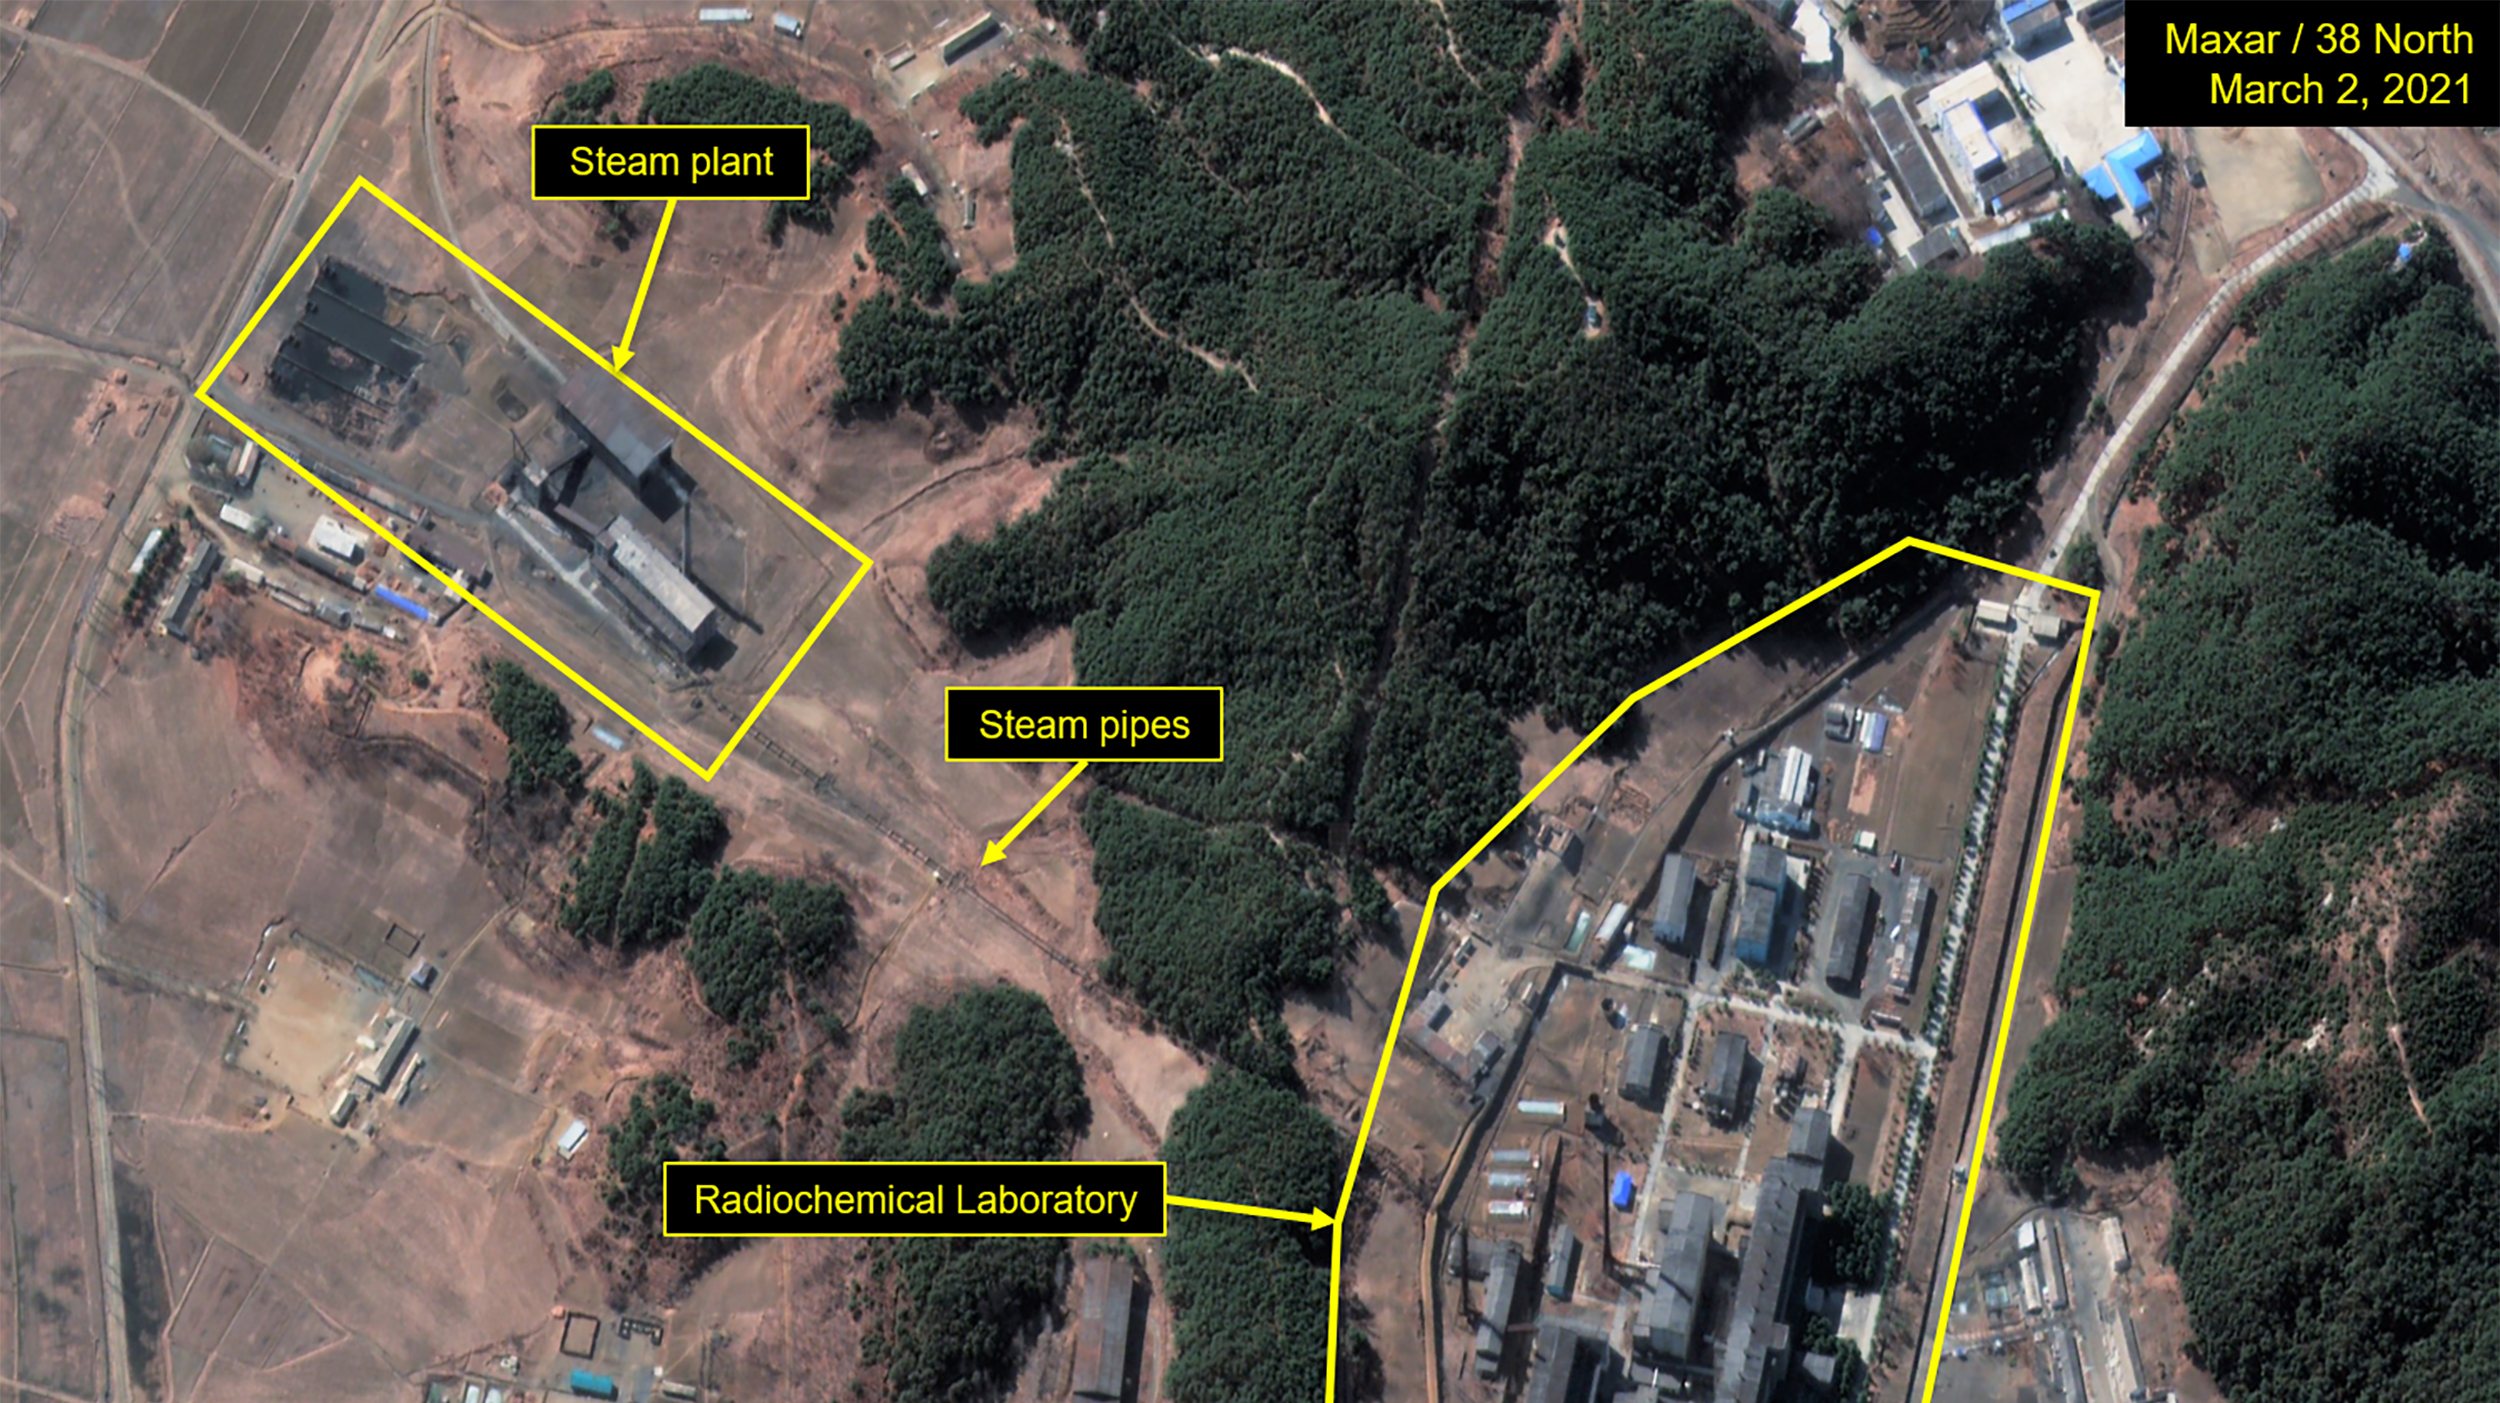 YONGBYON, NORTH KOREA -- March 2, 2021:   Figure 1. Overview of Radiochemical Laboratory and steam plant, March 2, 2021.